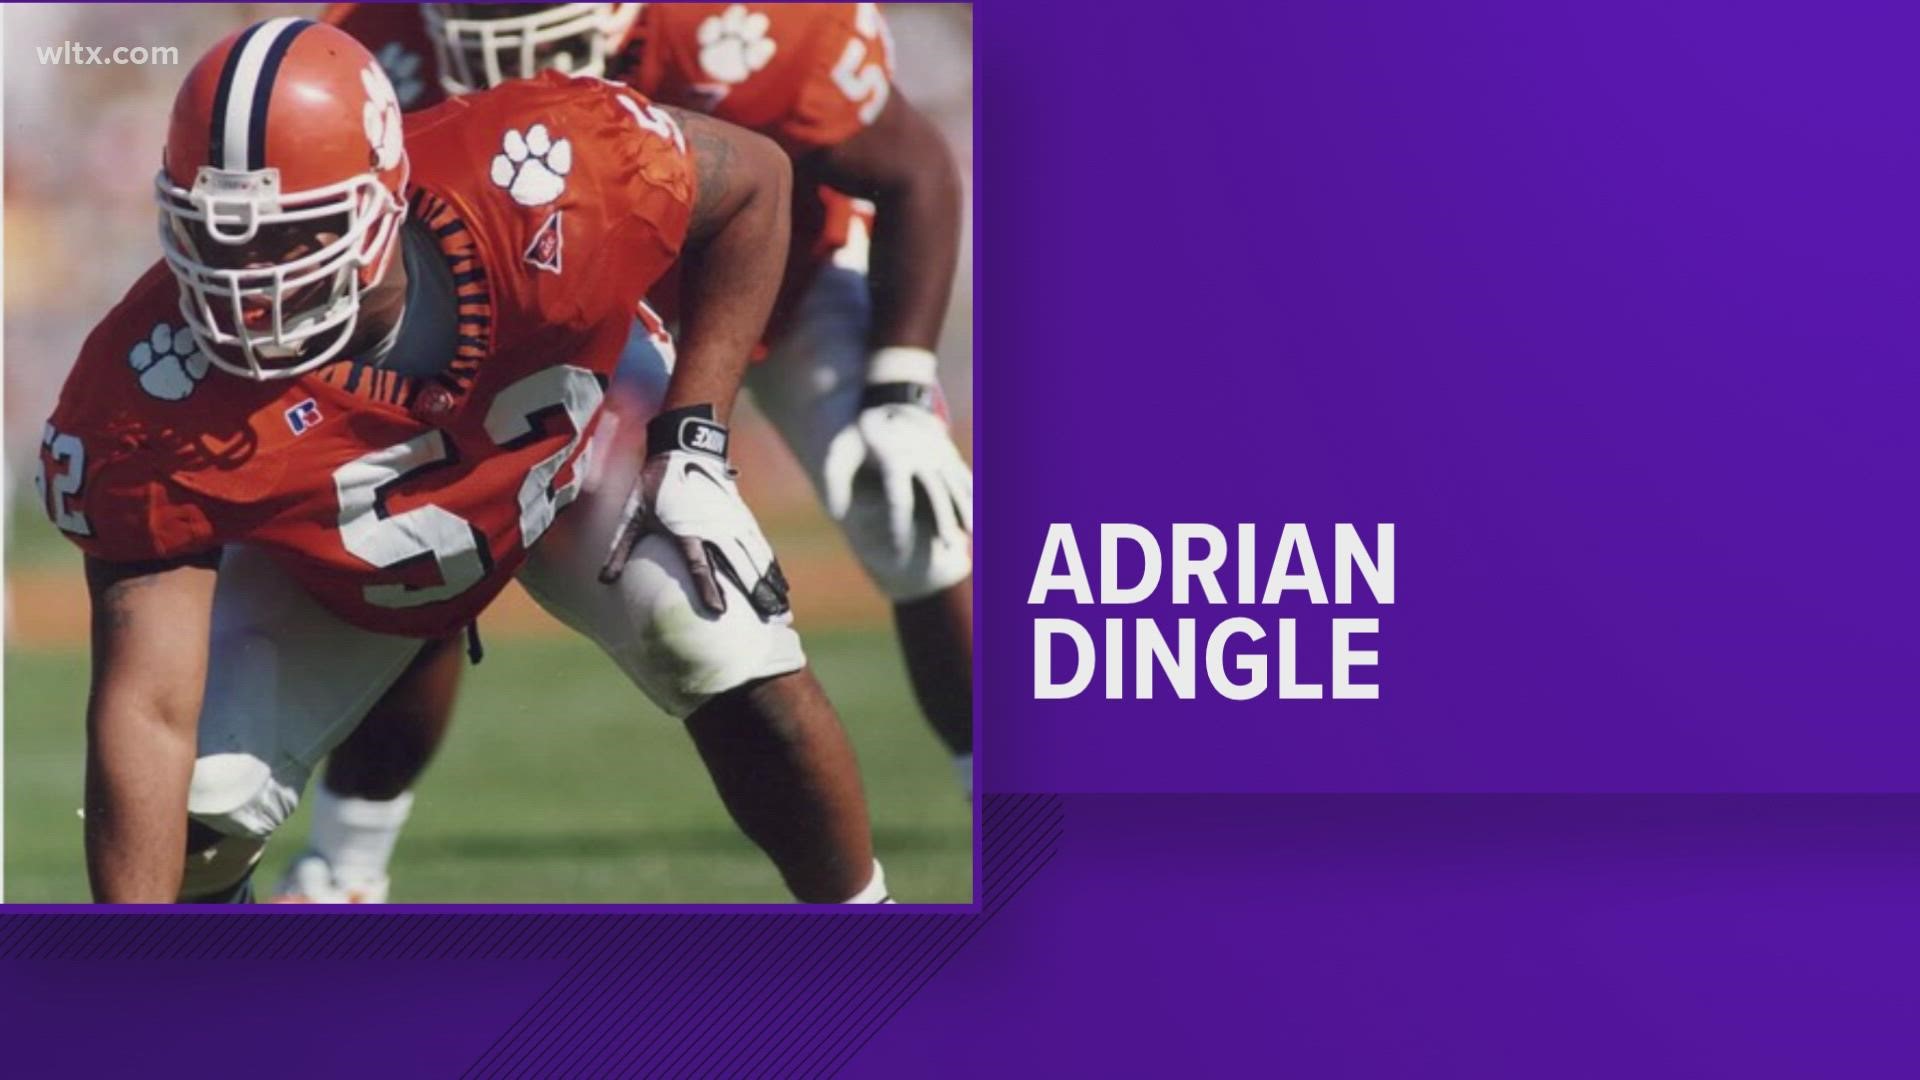 Dingle set longstanding records at Clemson as a defensive end and went on to play for the San Diego Chargers from 2000 to 2004.